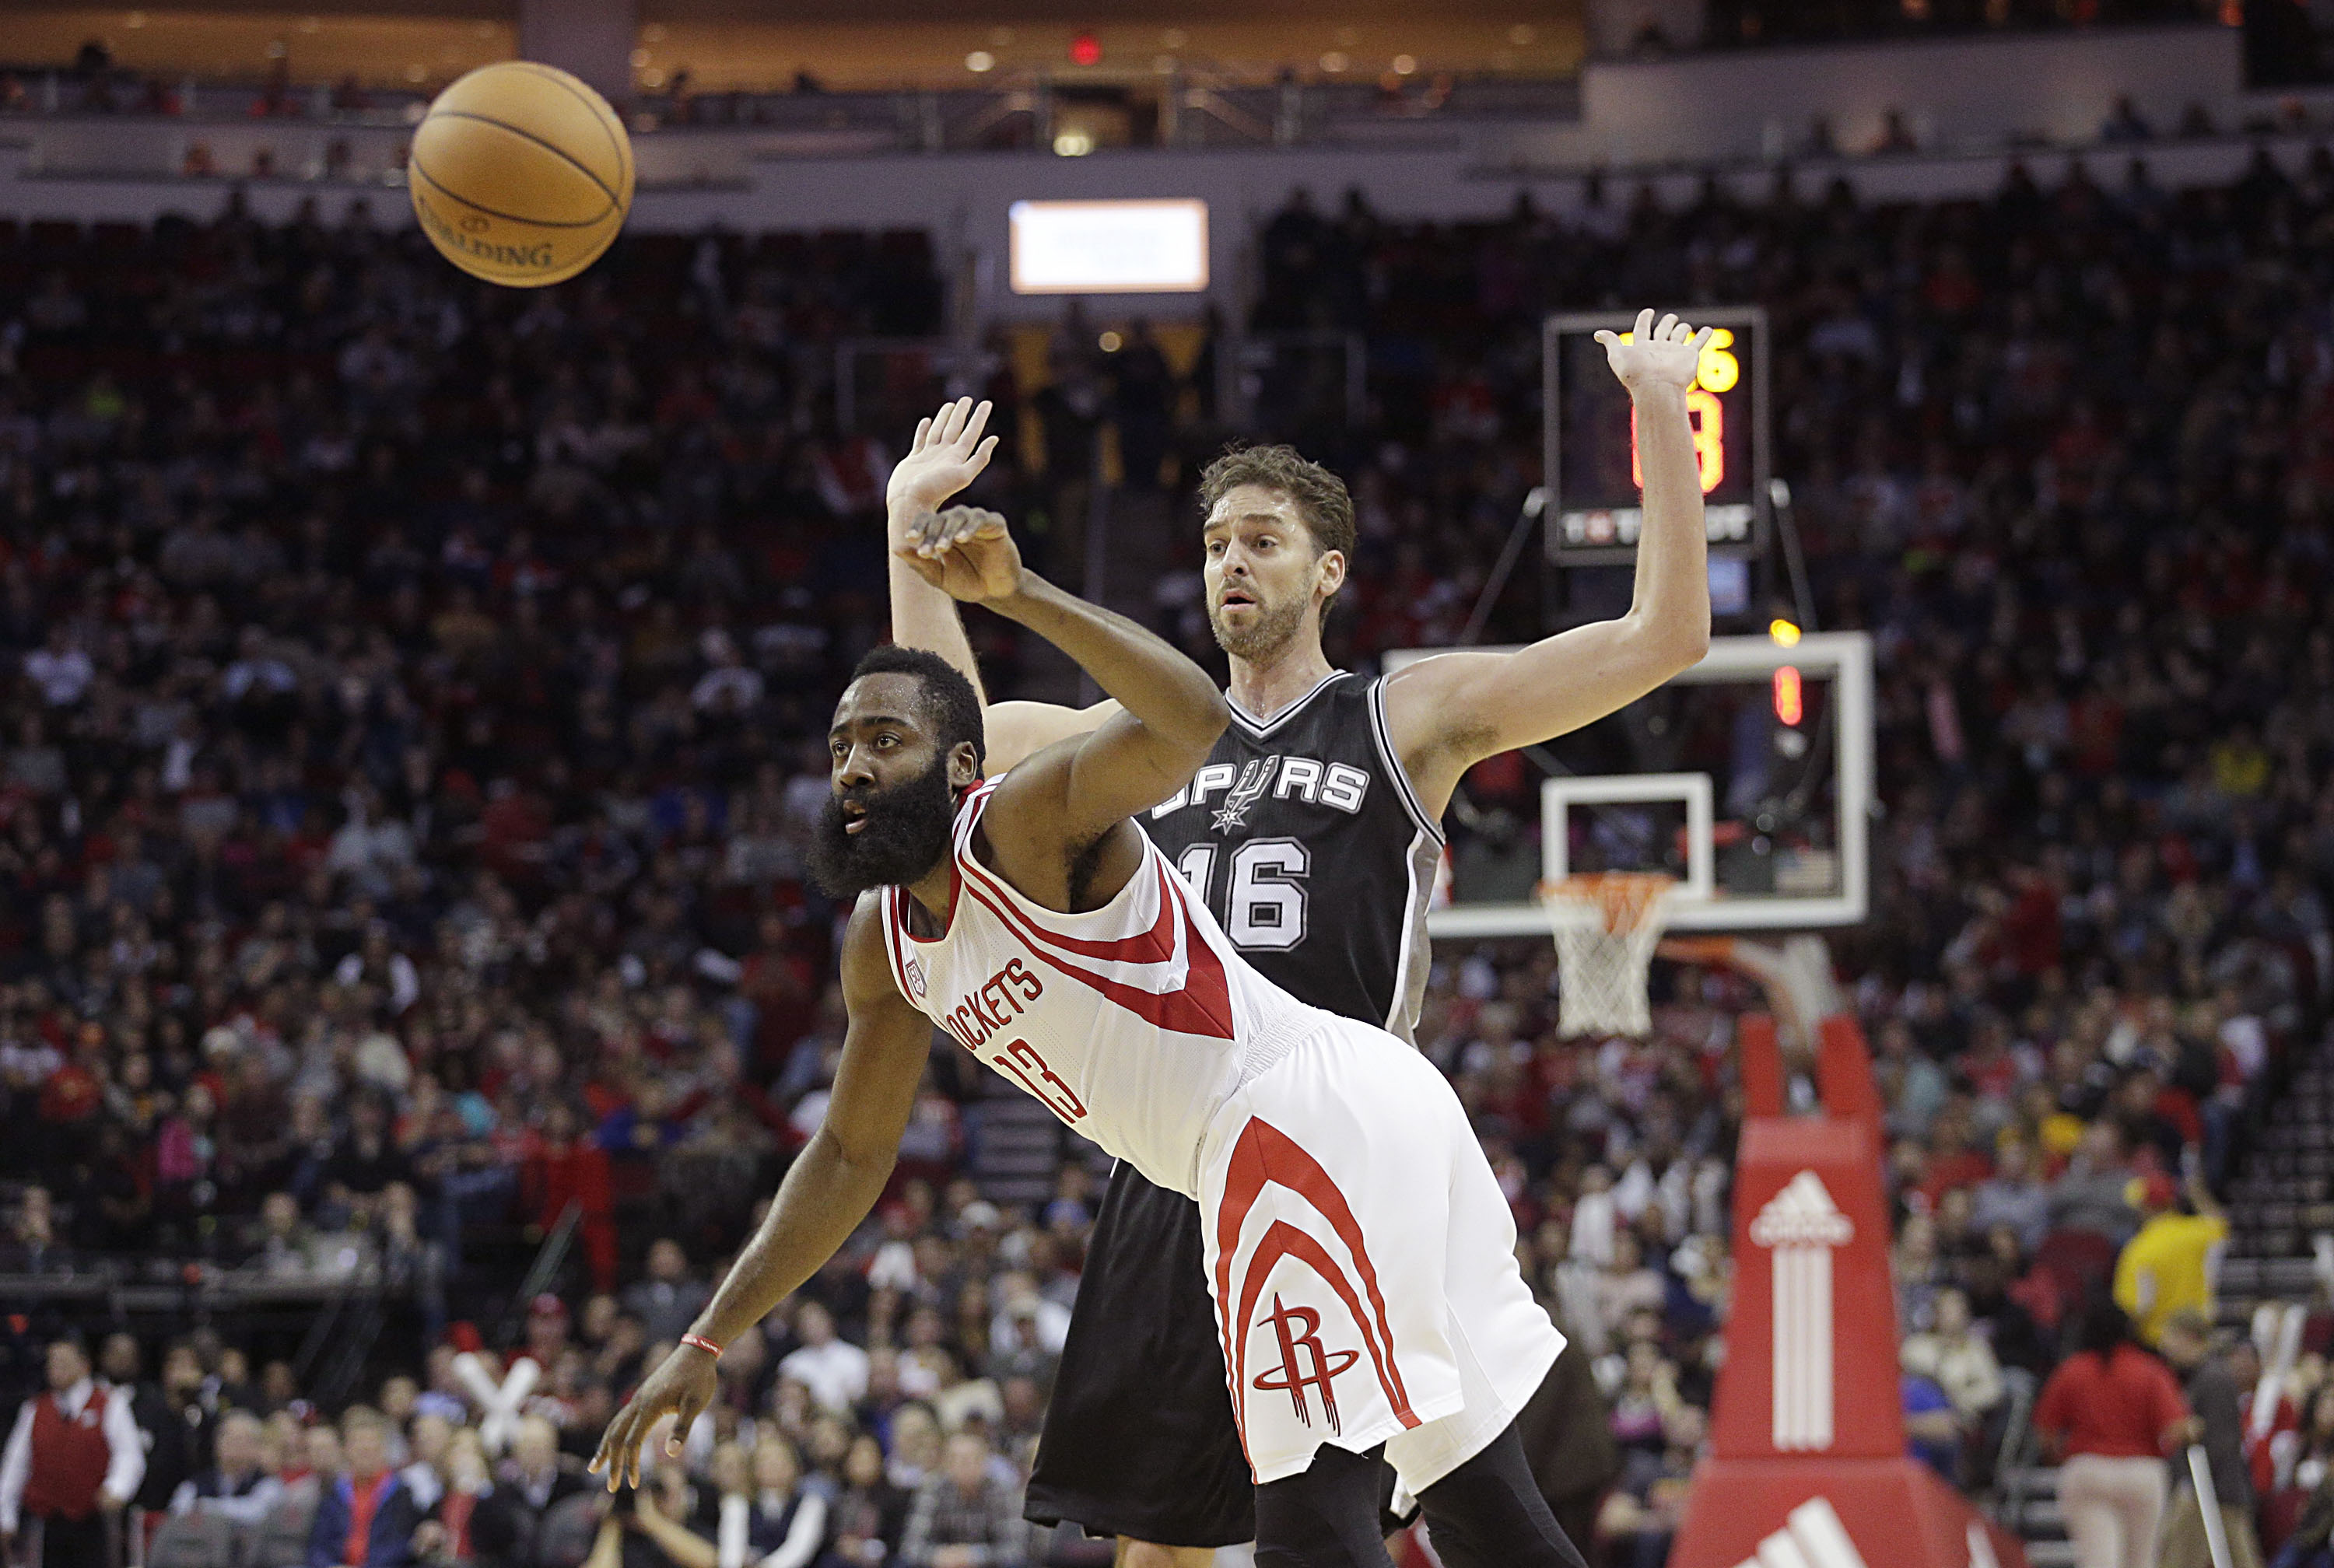 Rockets at Spurs live stream: How to watch online - FanSided